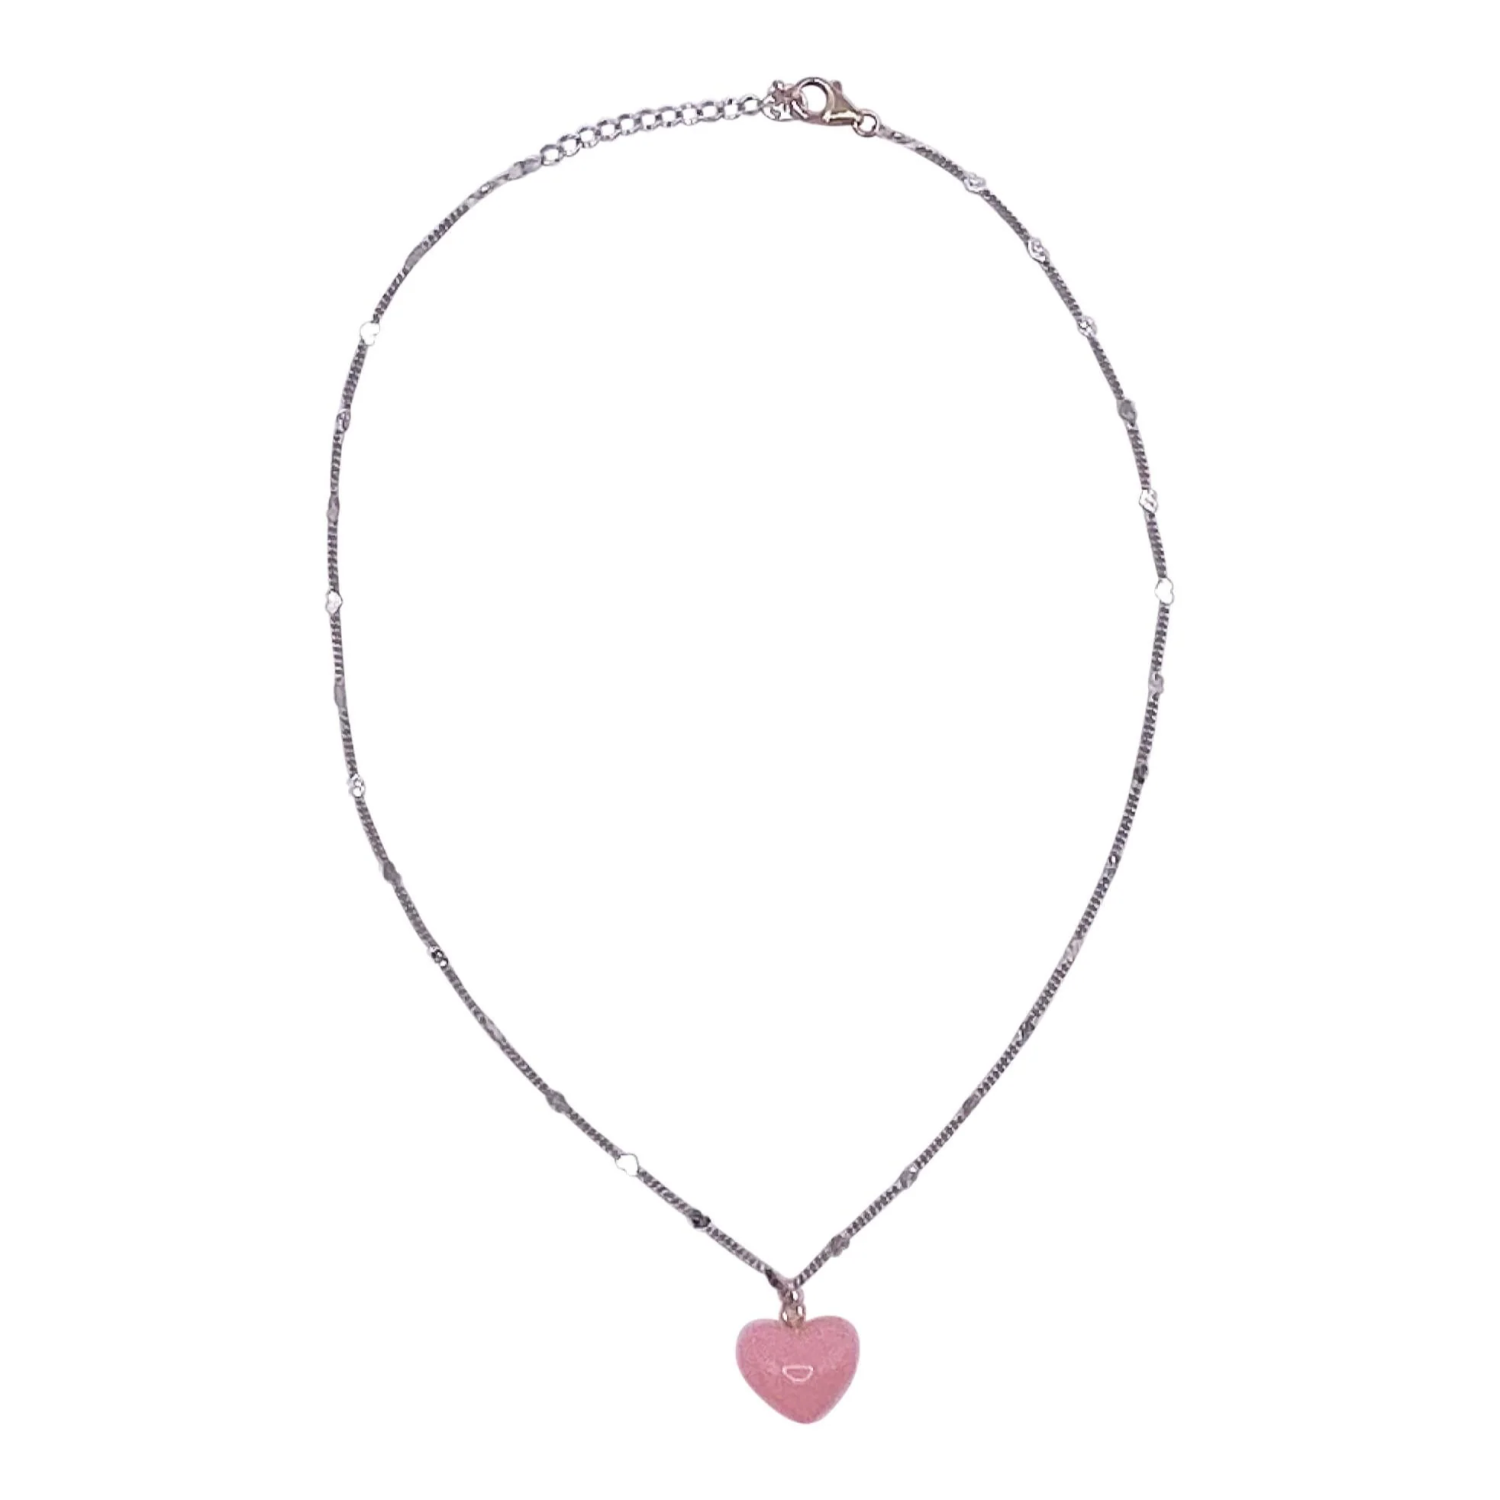 Heart Chain Necklace - Sterling Silver